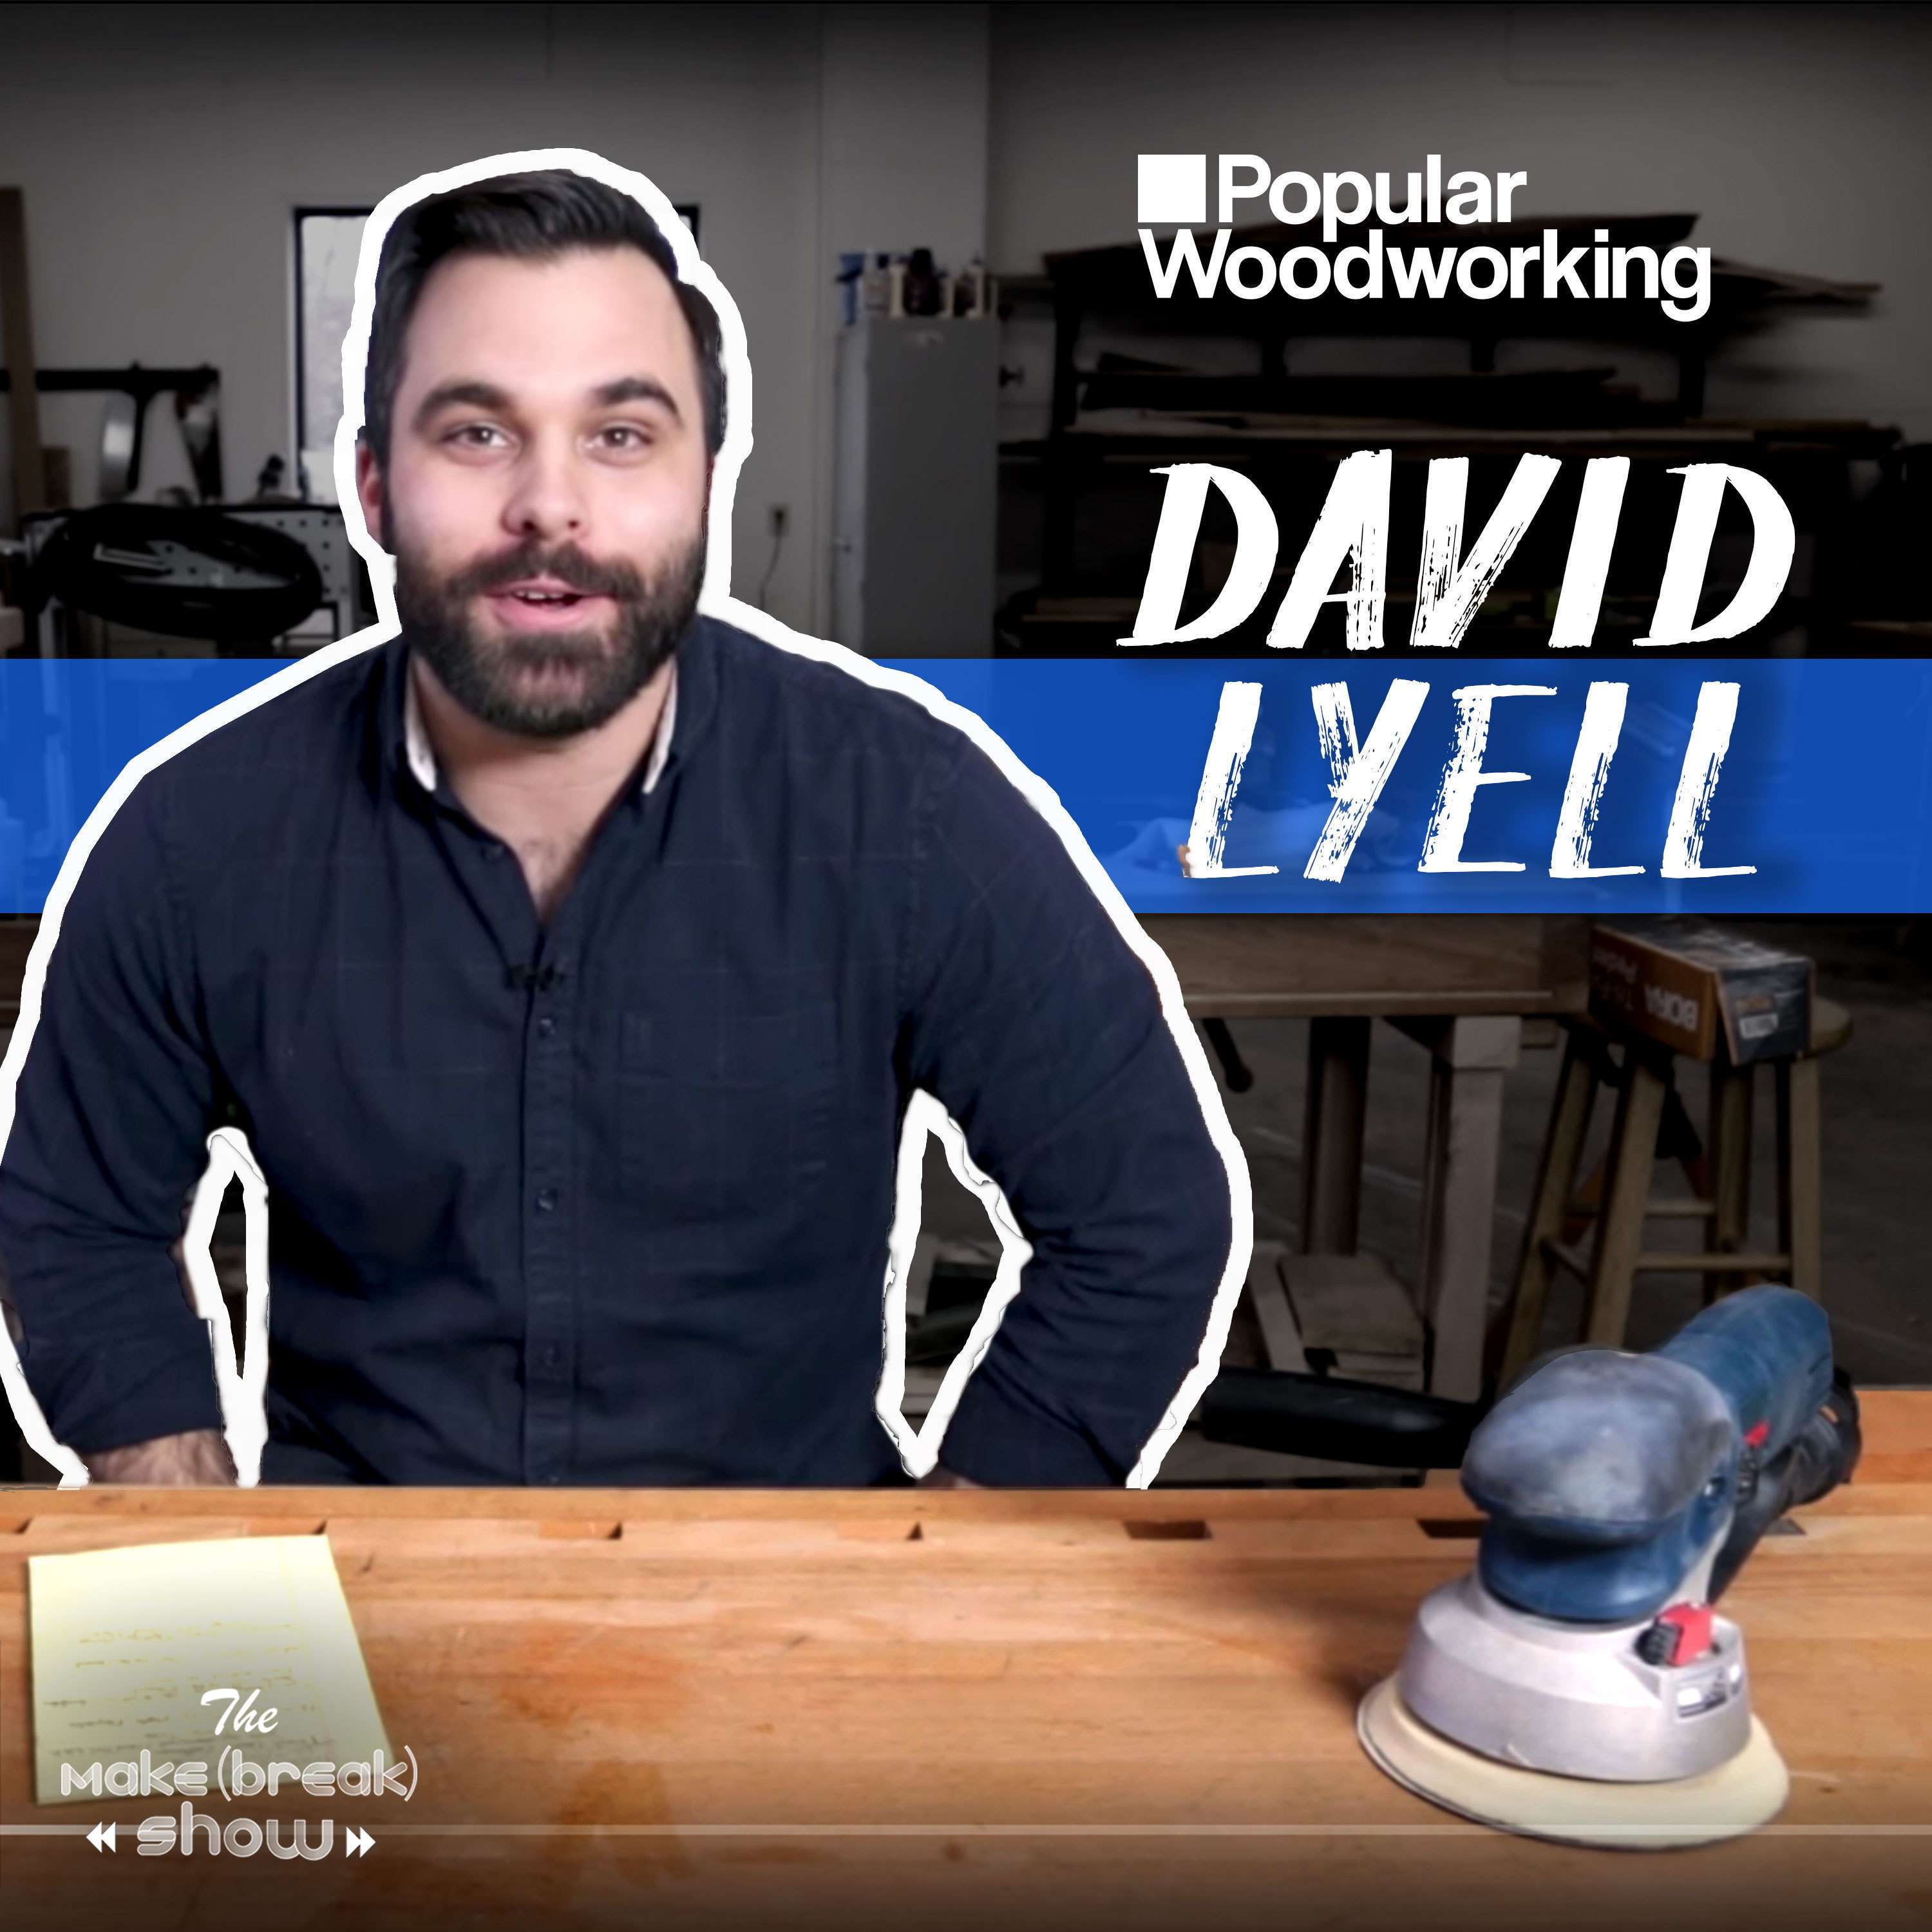 052: Popular Woodworking with David Lyell